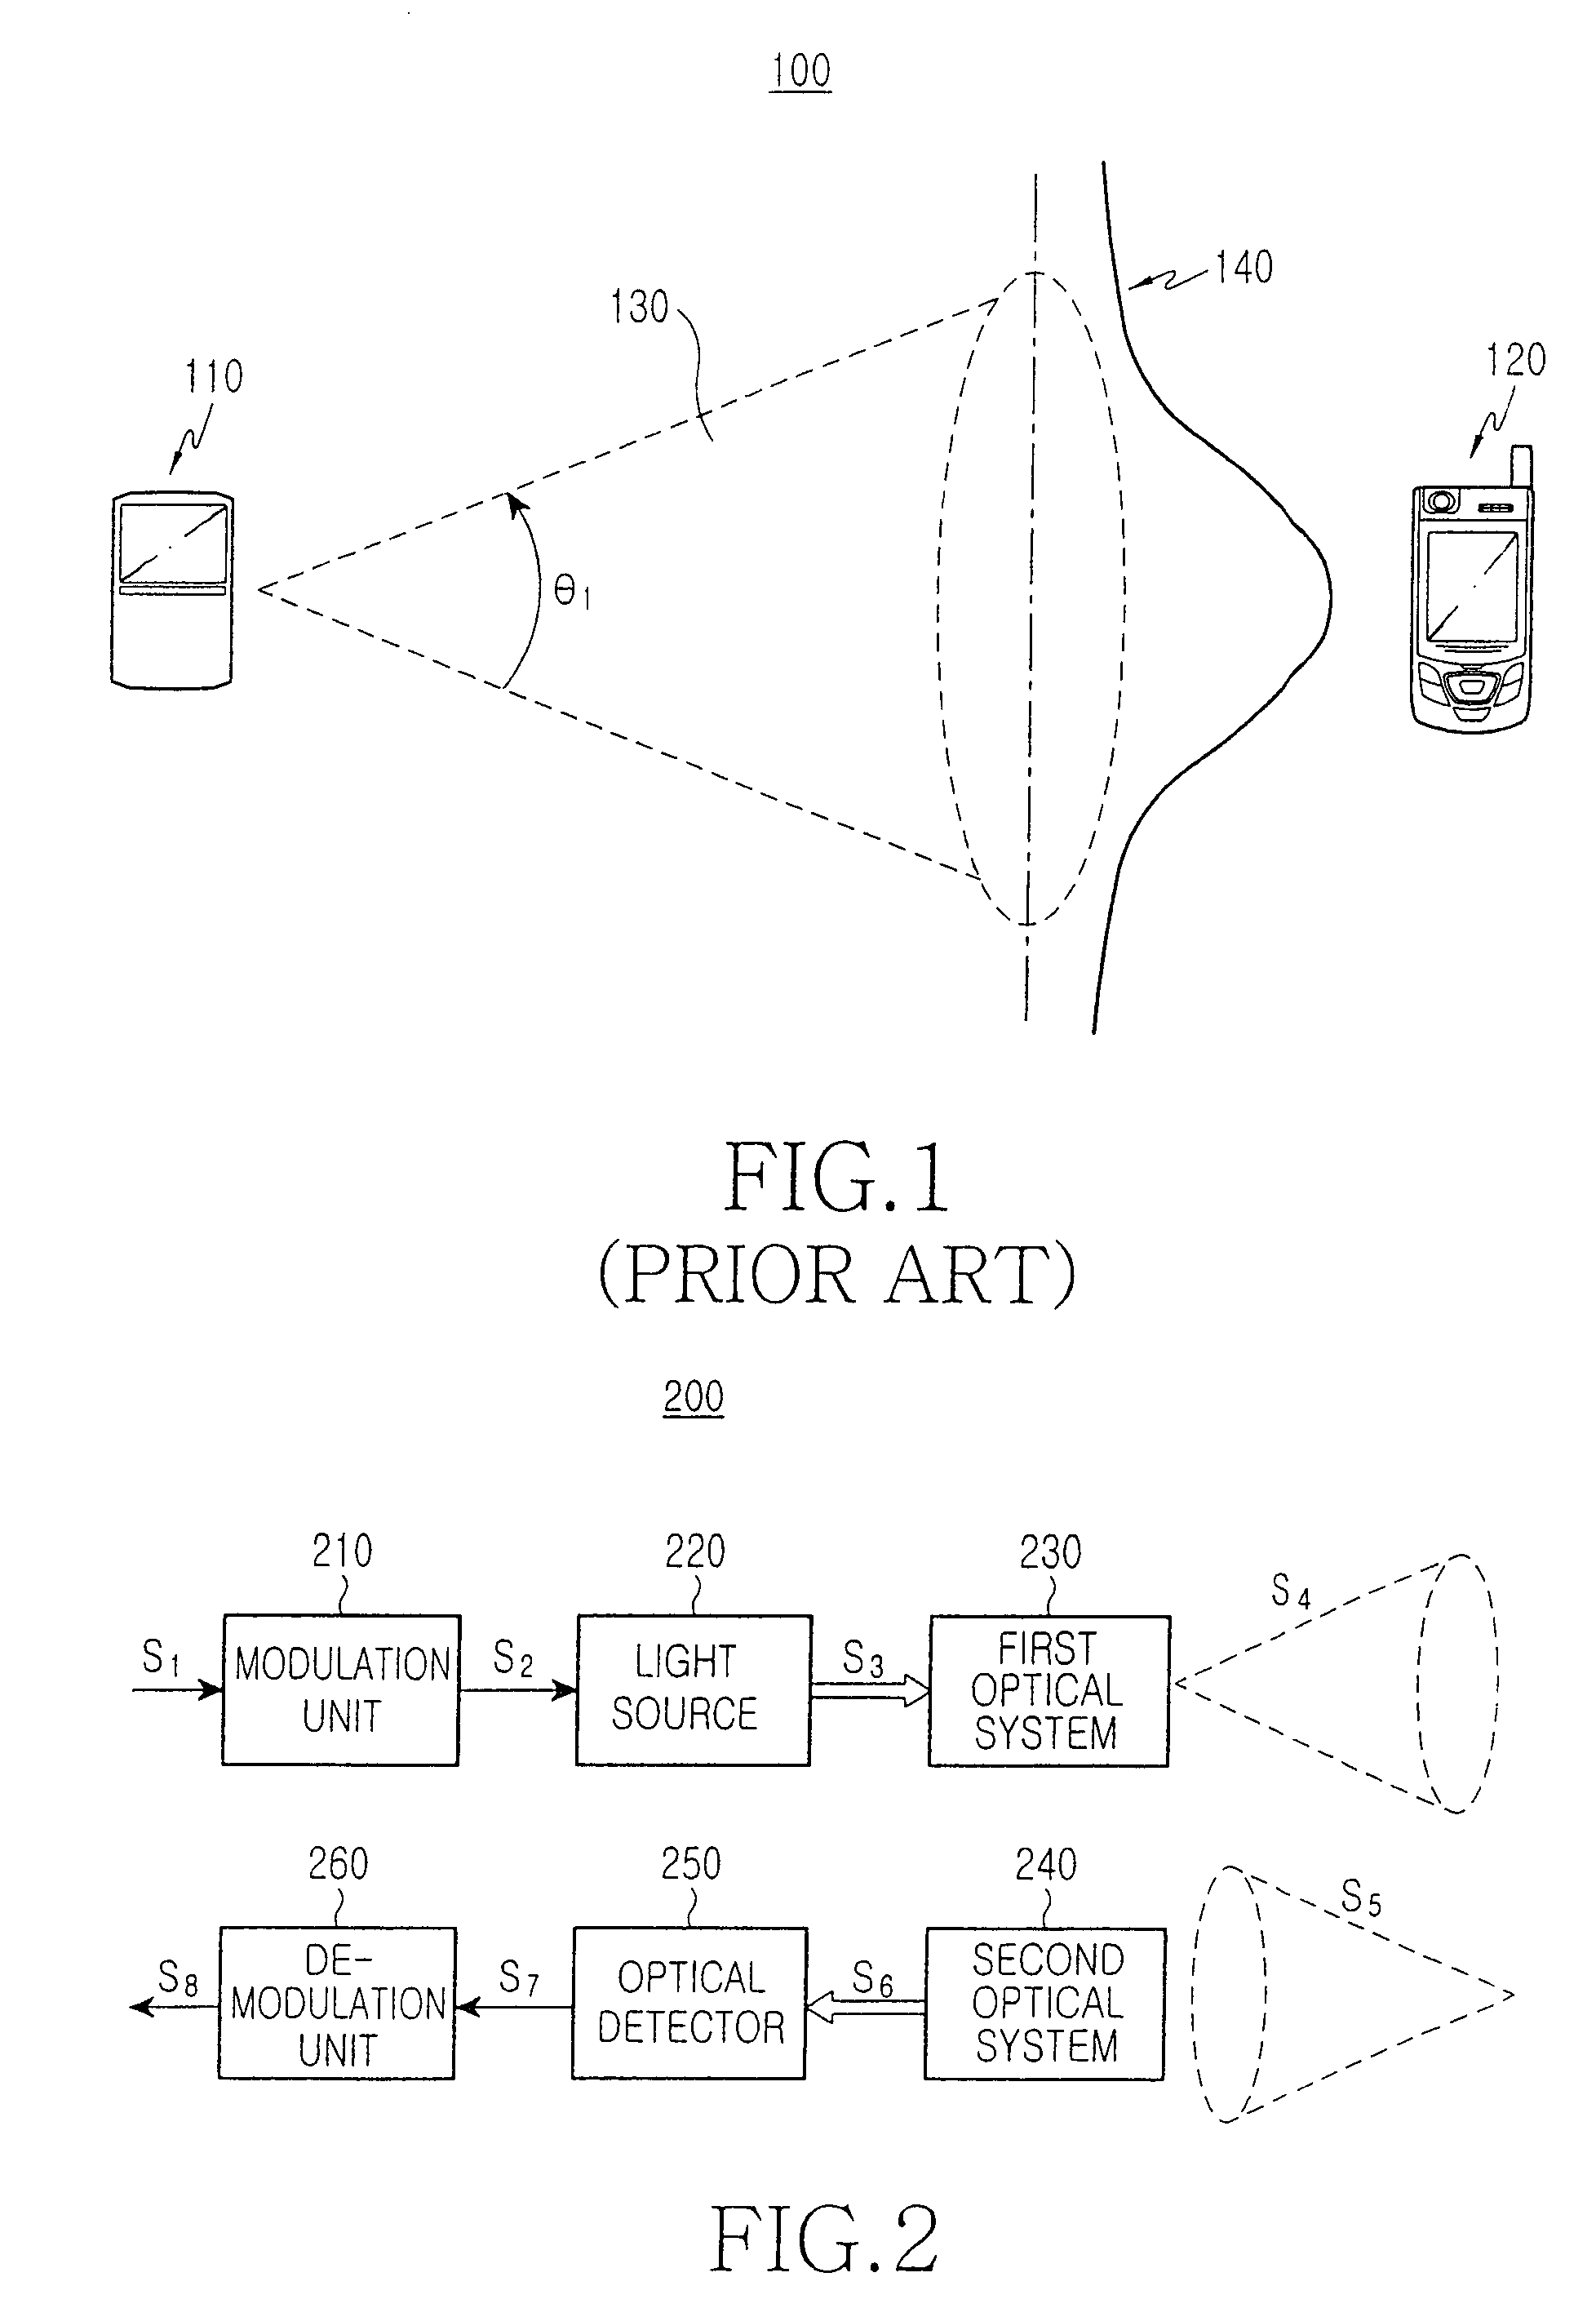 Wireless communication interface for portable wireless terminal